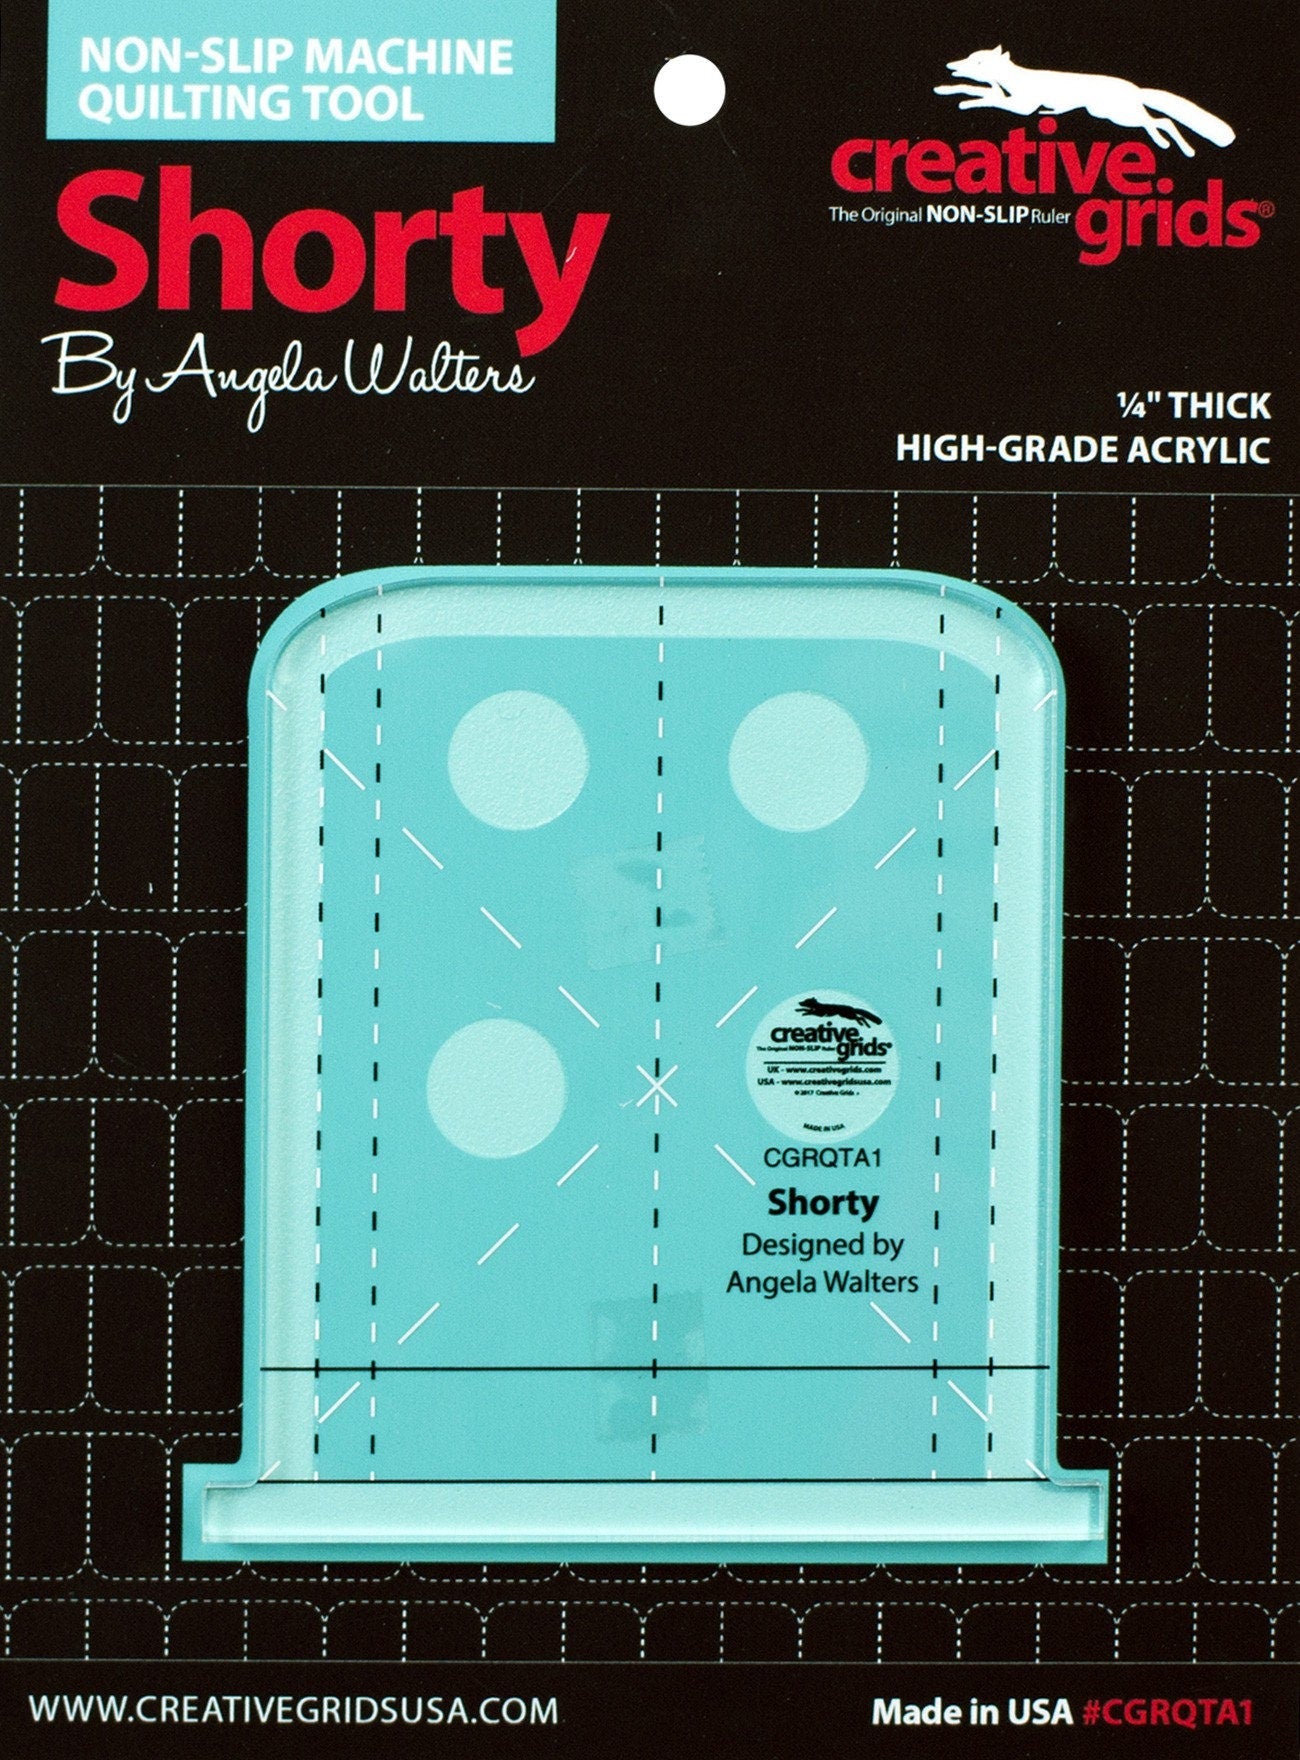 Creative Grids Machine Quilting Tool - Shorty in packaging front-view